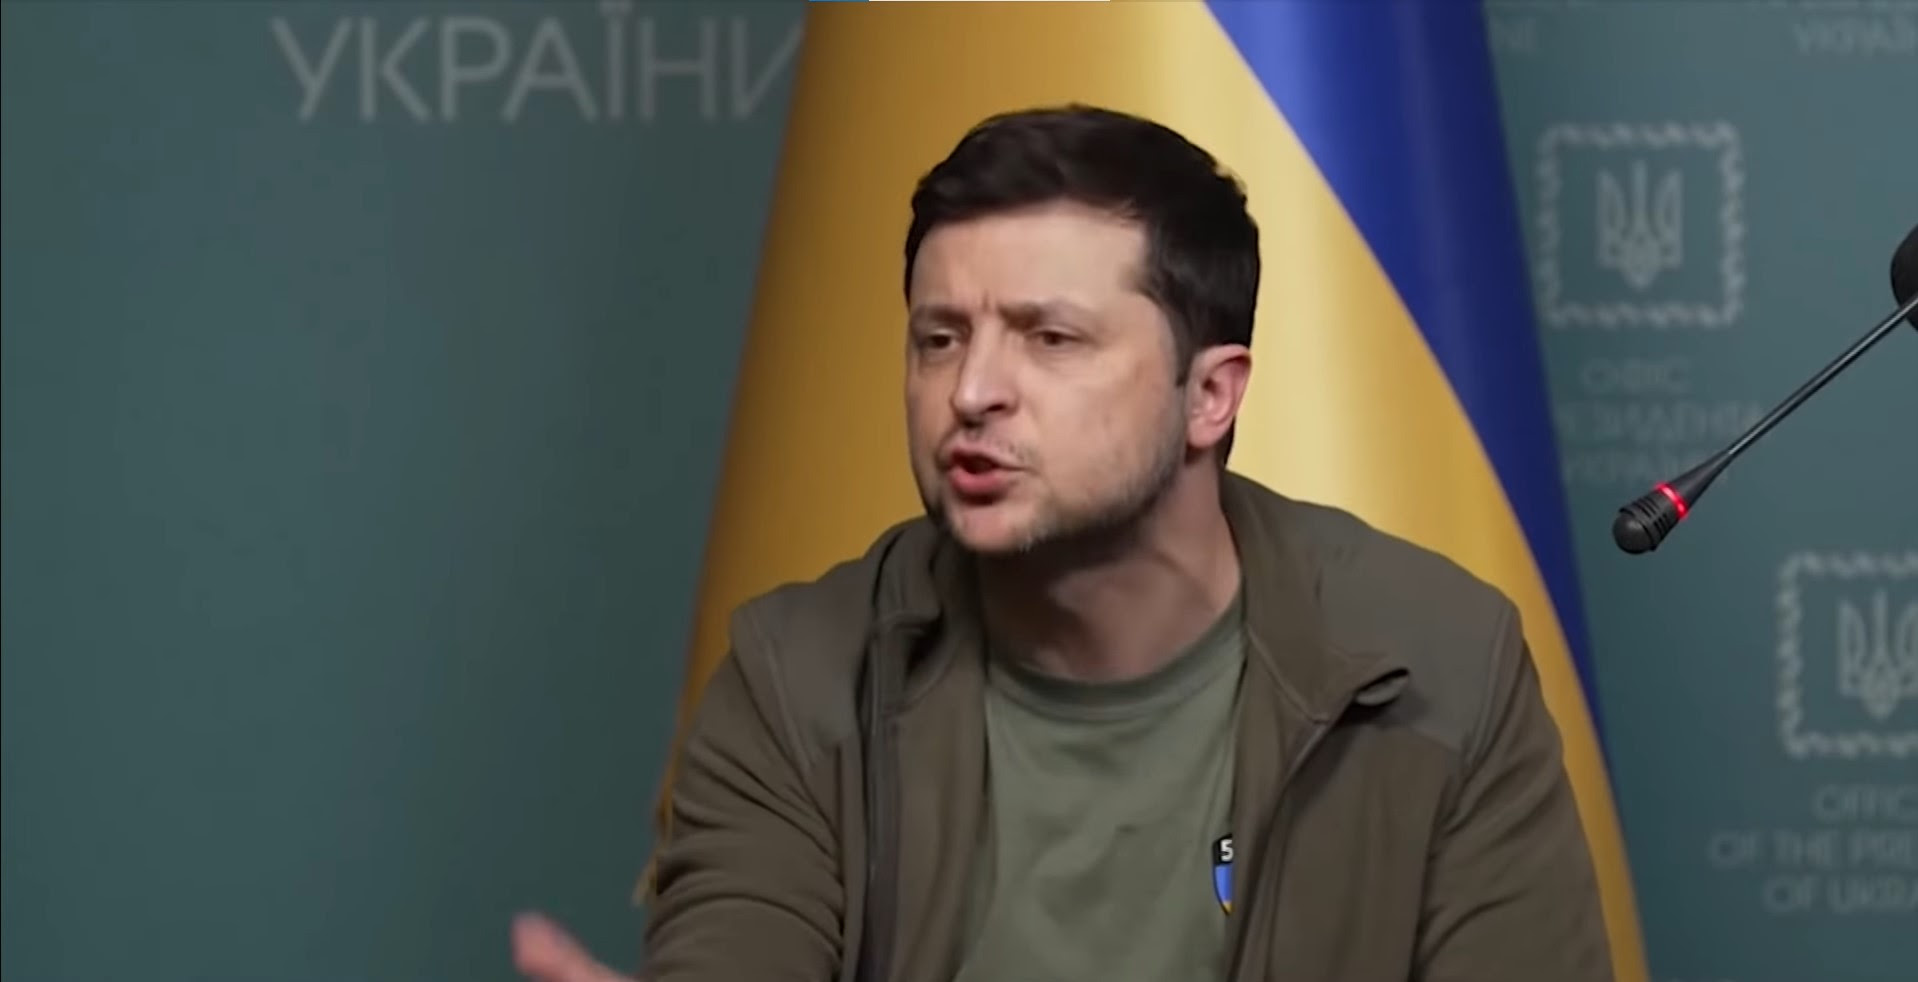 Ukraine Calls for Peace After Money Laundering Scheme is Exposed